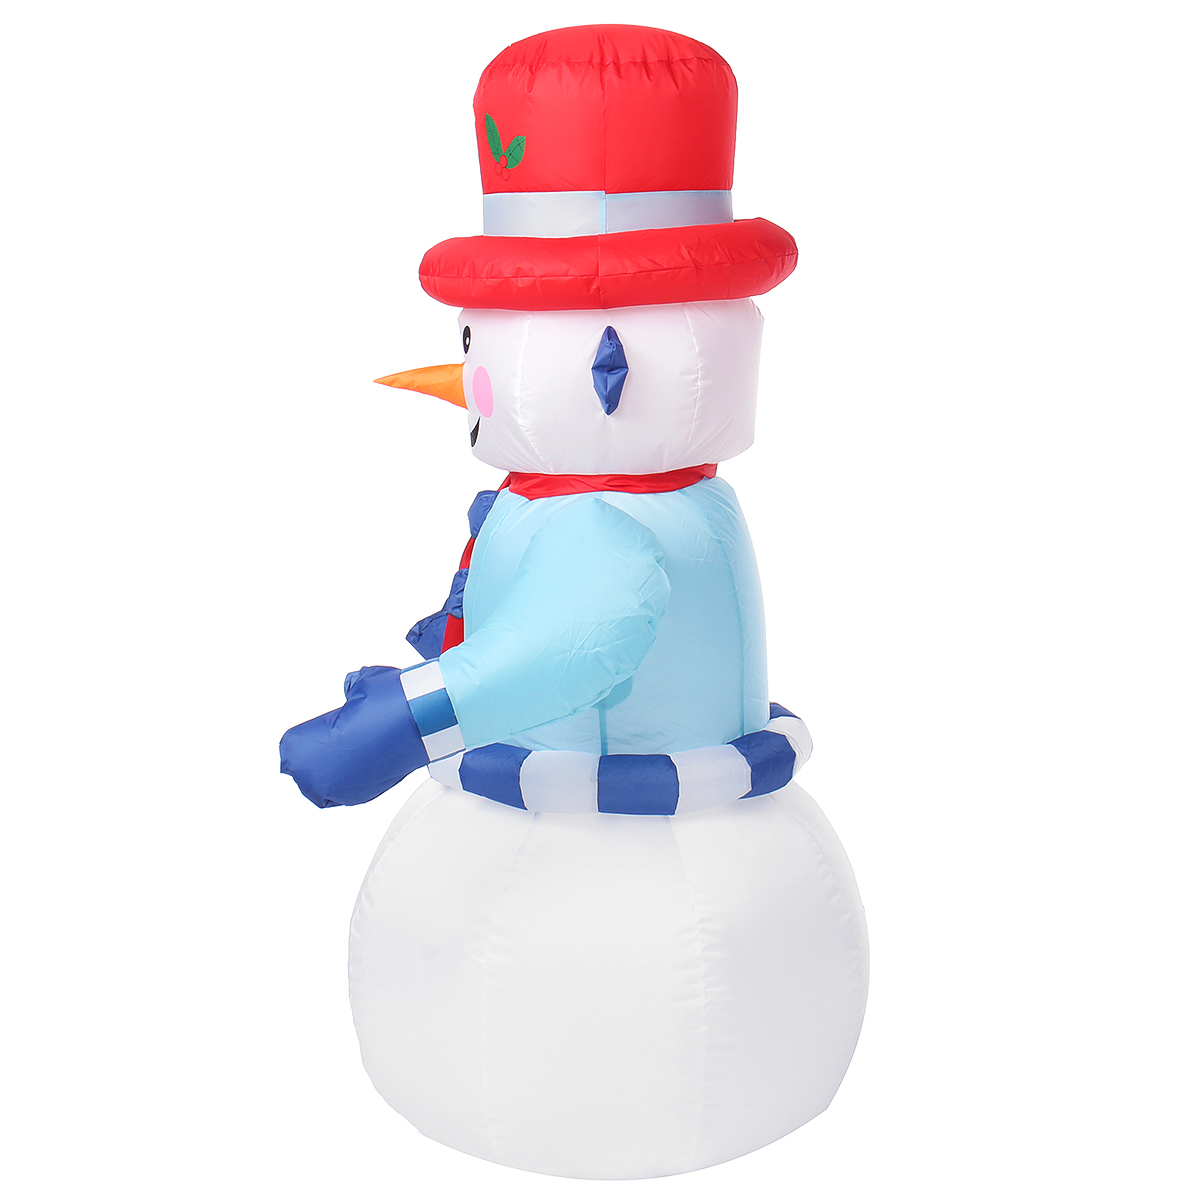 8FT-LED-Christmas-Inflatable-Snowman-Halloween-Outdoors-Ornaments-Shop-Decoration-1785588-7